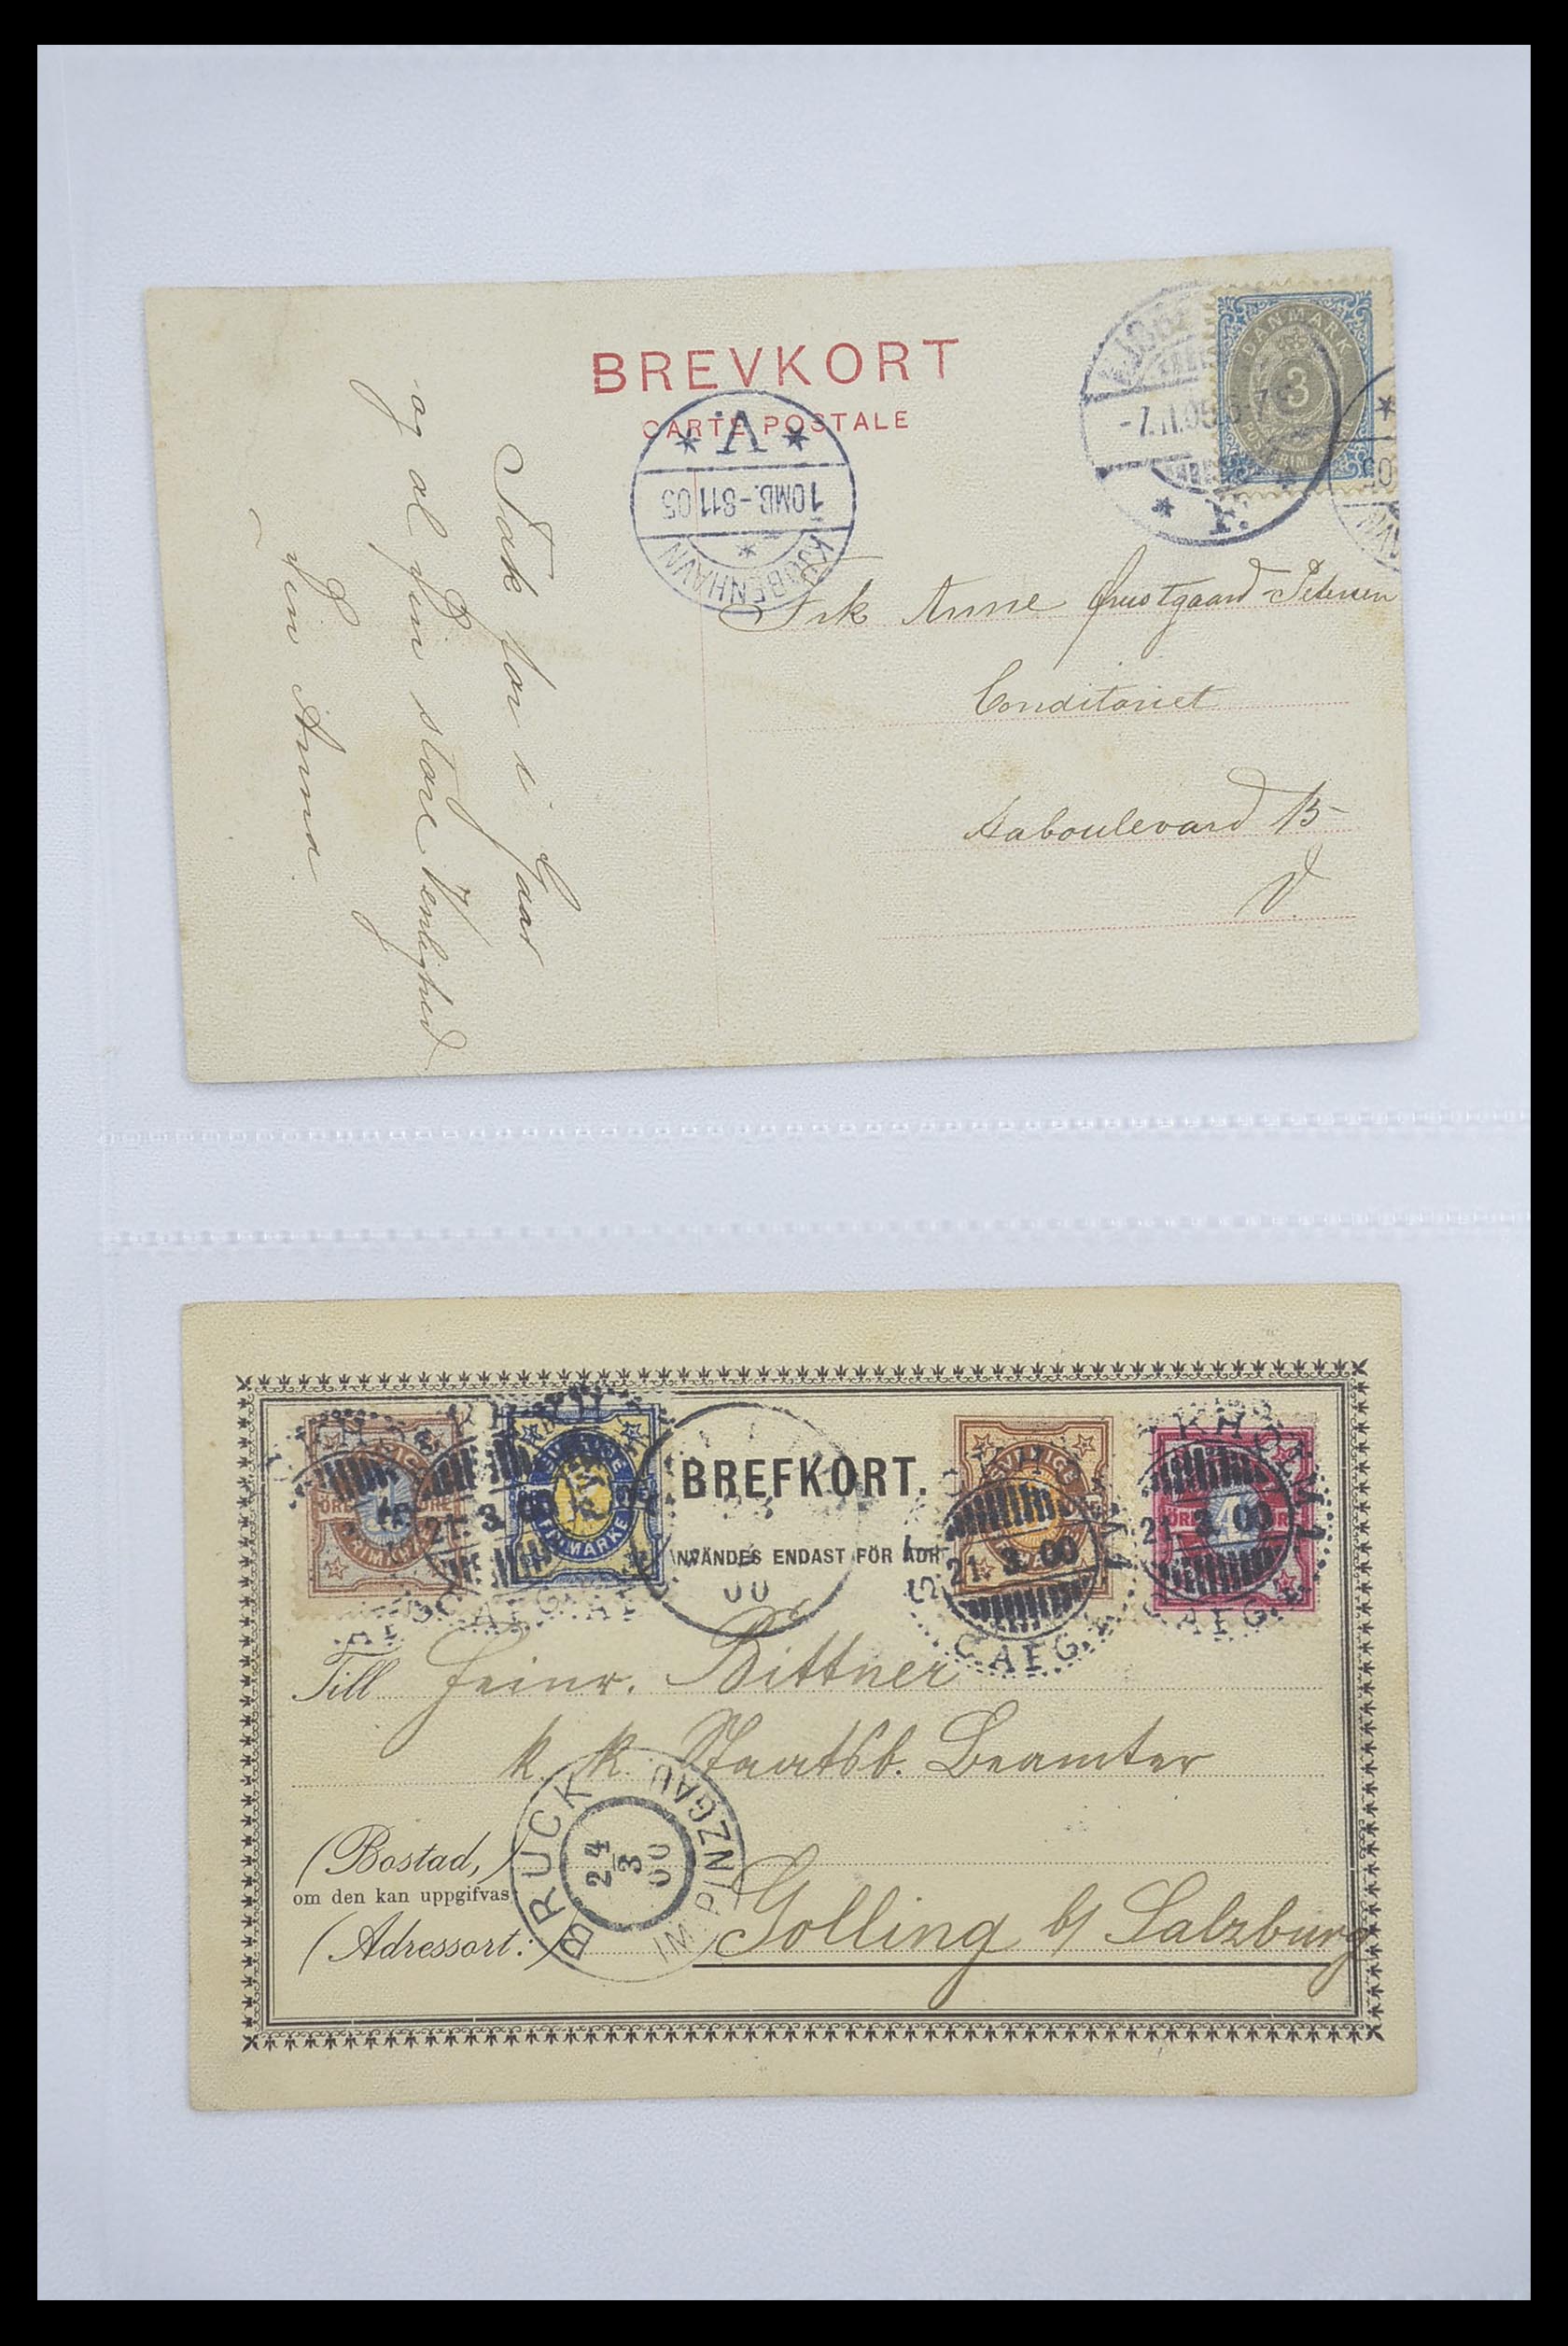 33241 009 - Stamp collection 33241 Scandinavia covers 1860-1930.